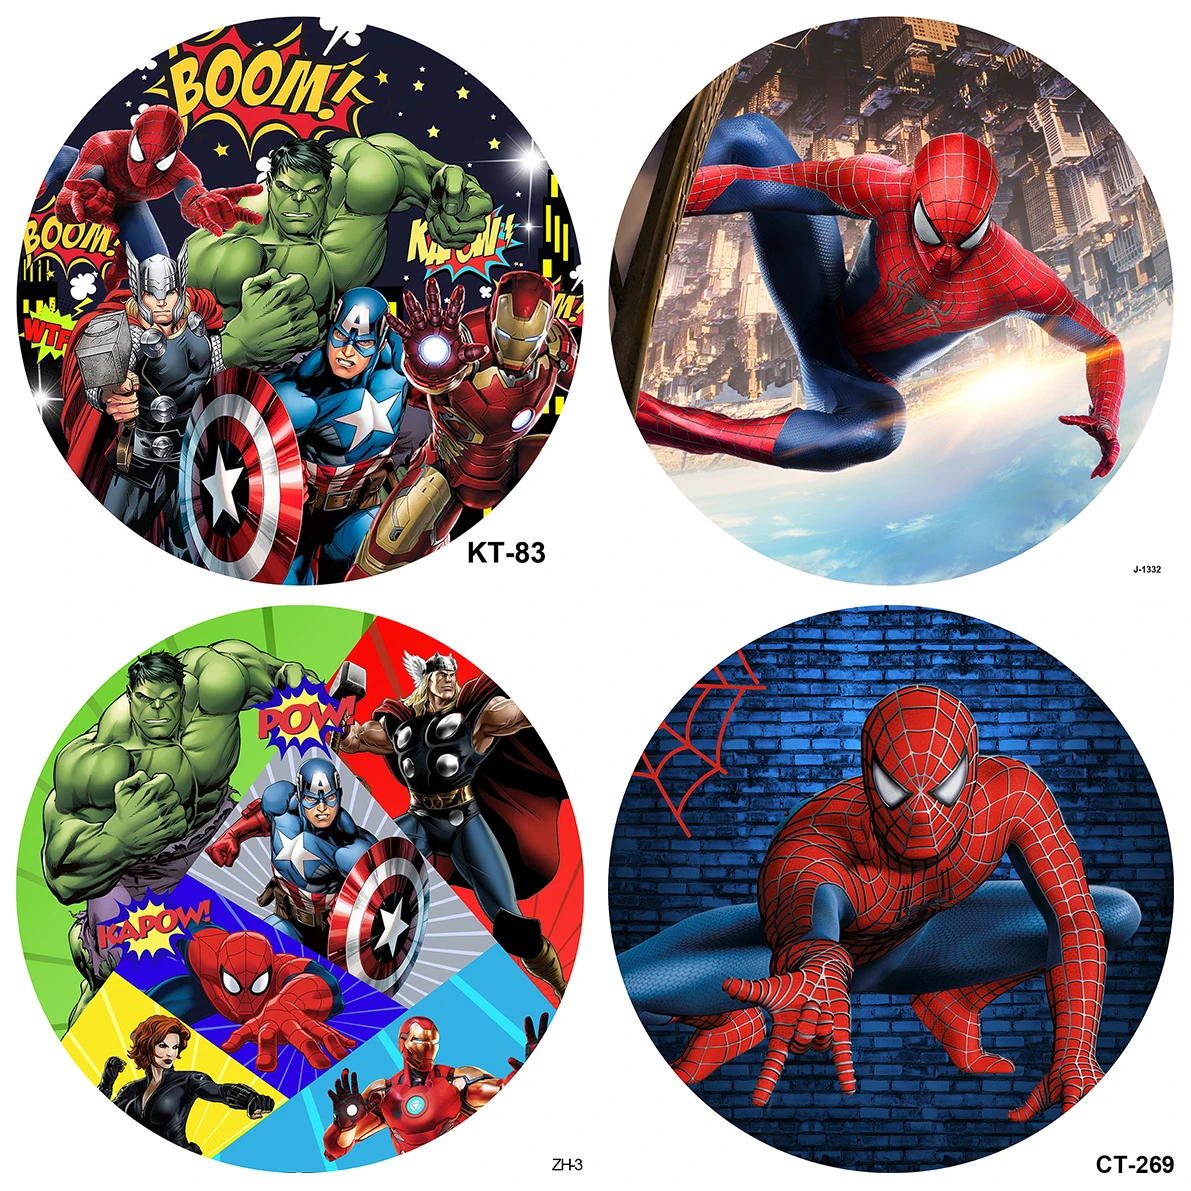 The Avengers Superhero Spiderman Round Background for Boys Birthday Party Studio Booth Props Circle Backdrop Covers Elastic